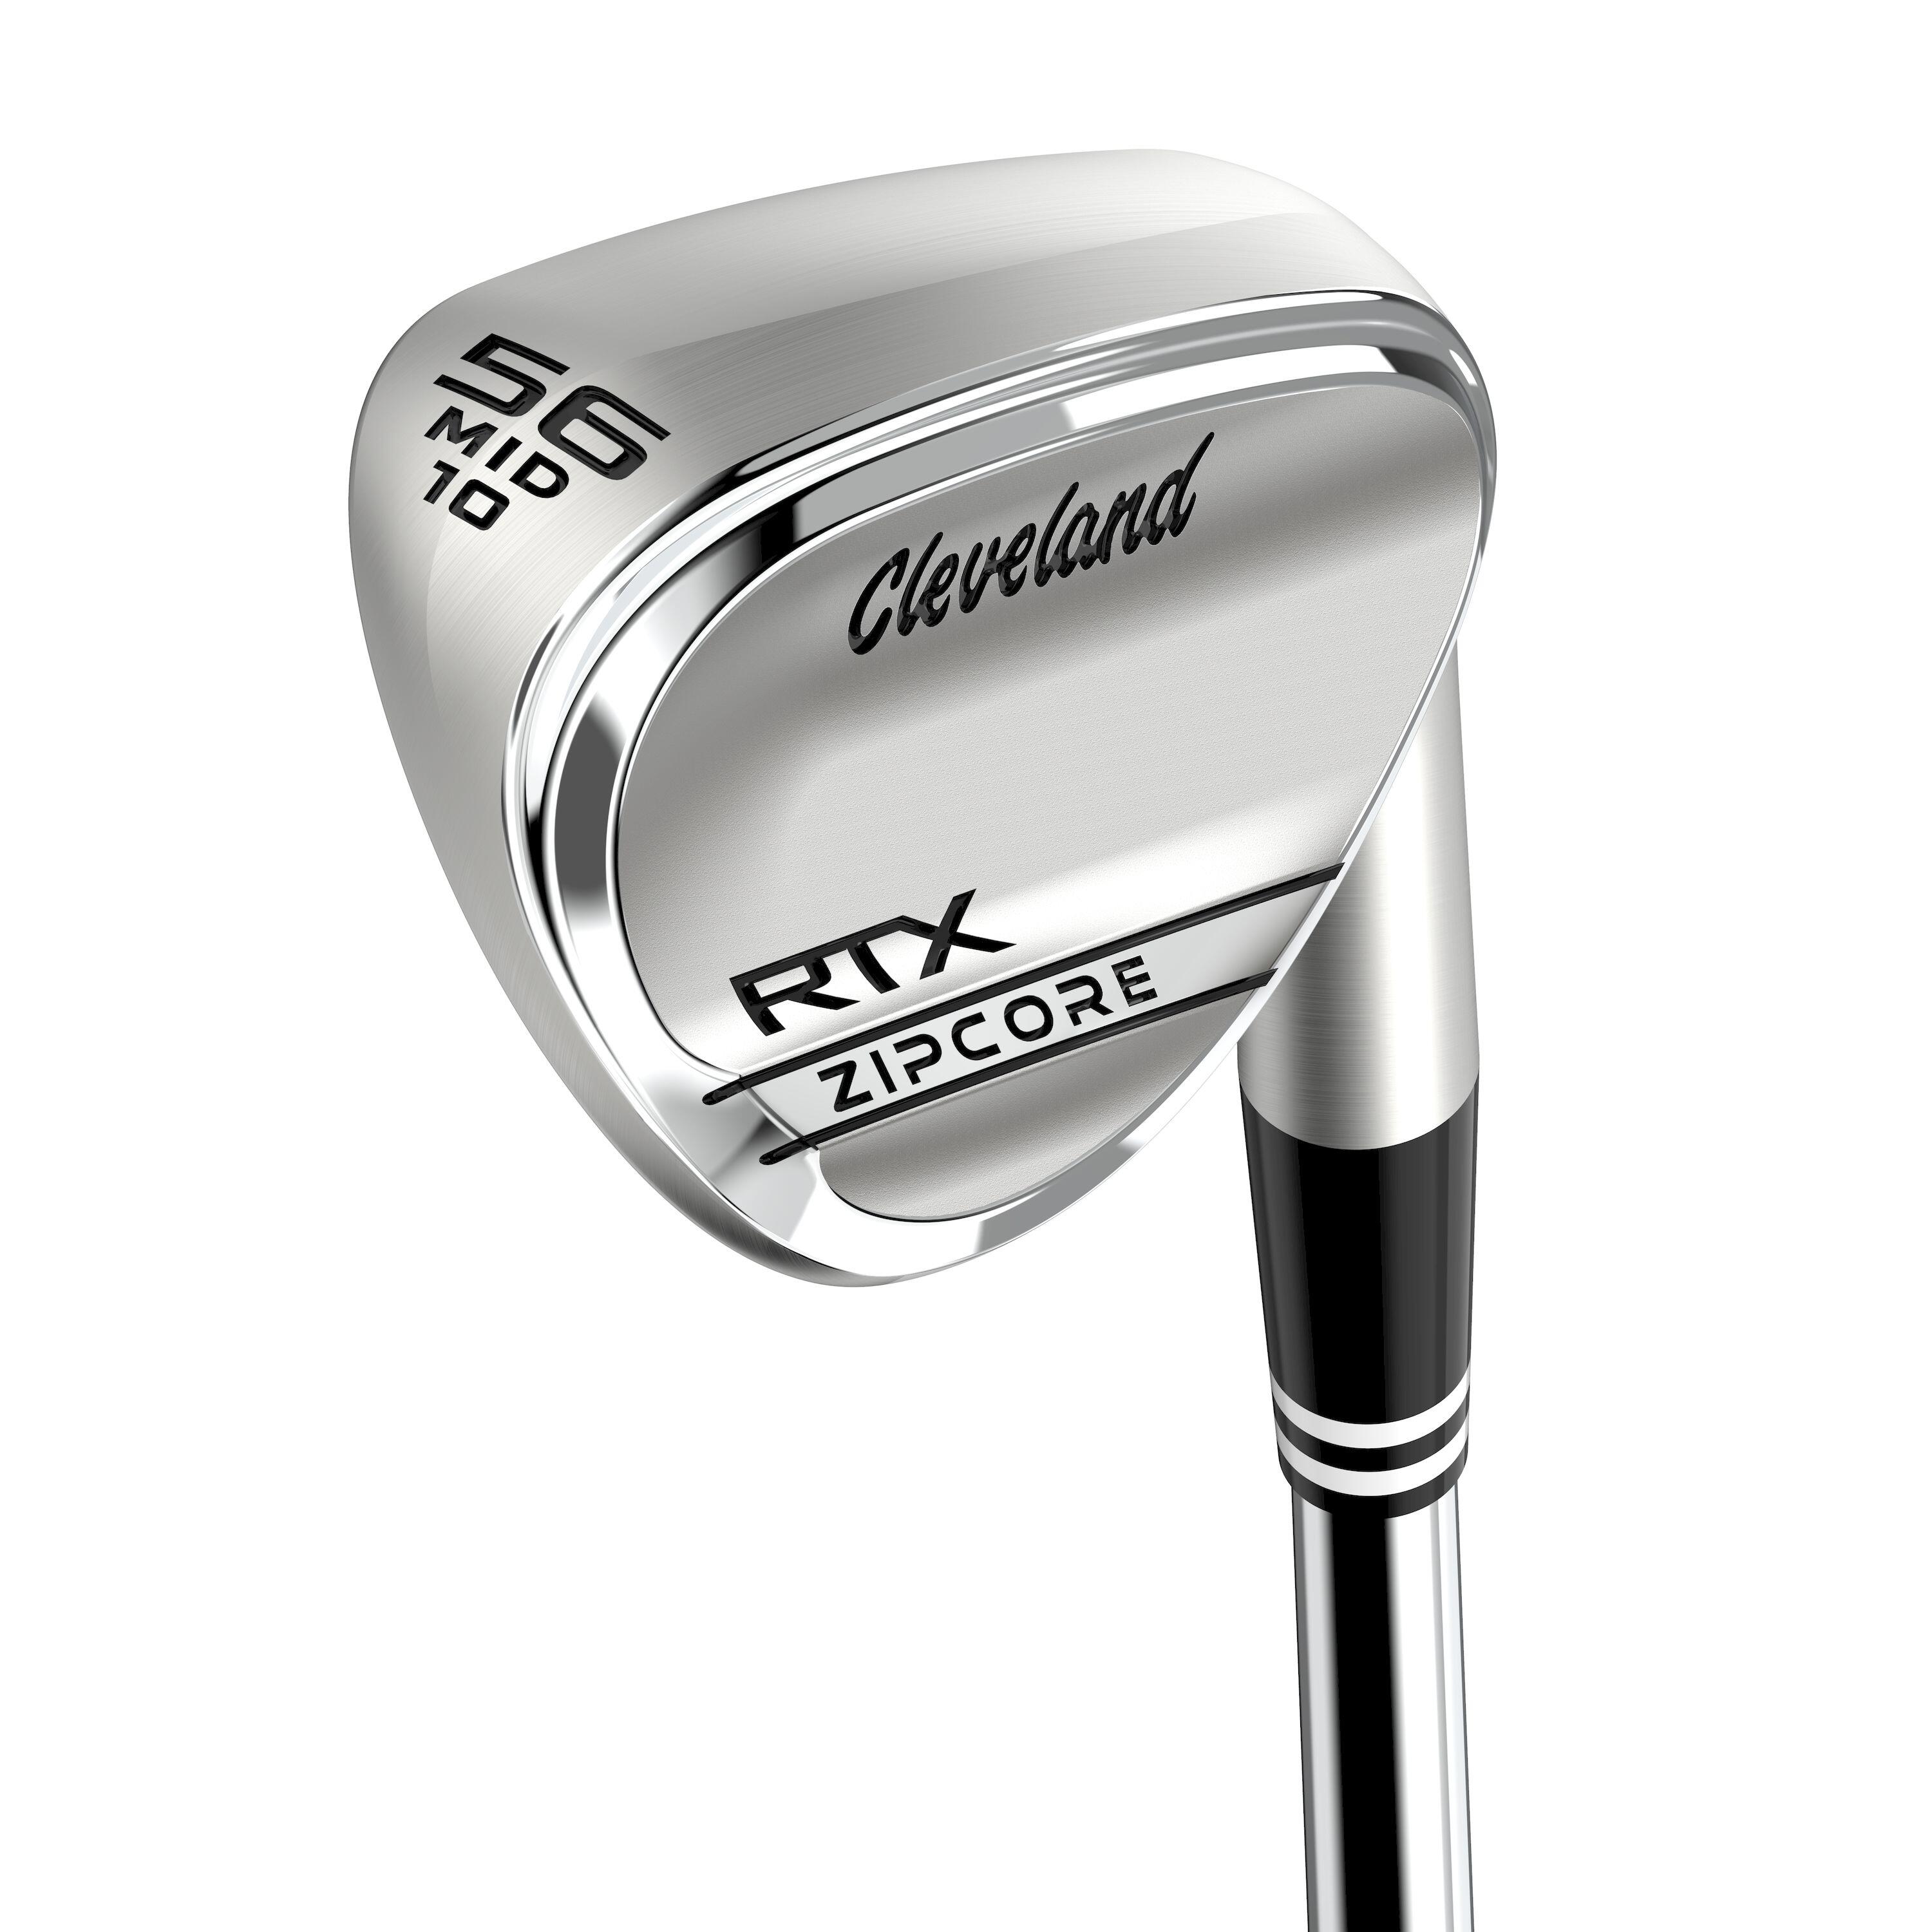 CLEVELAND GOLF MEN'S GOLF WEDGE RIGHT HANDED - CLEVELAND RTX6